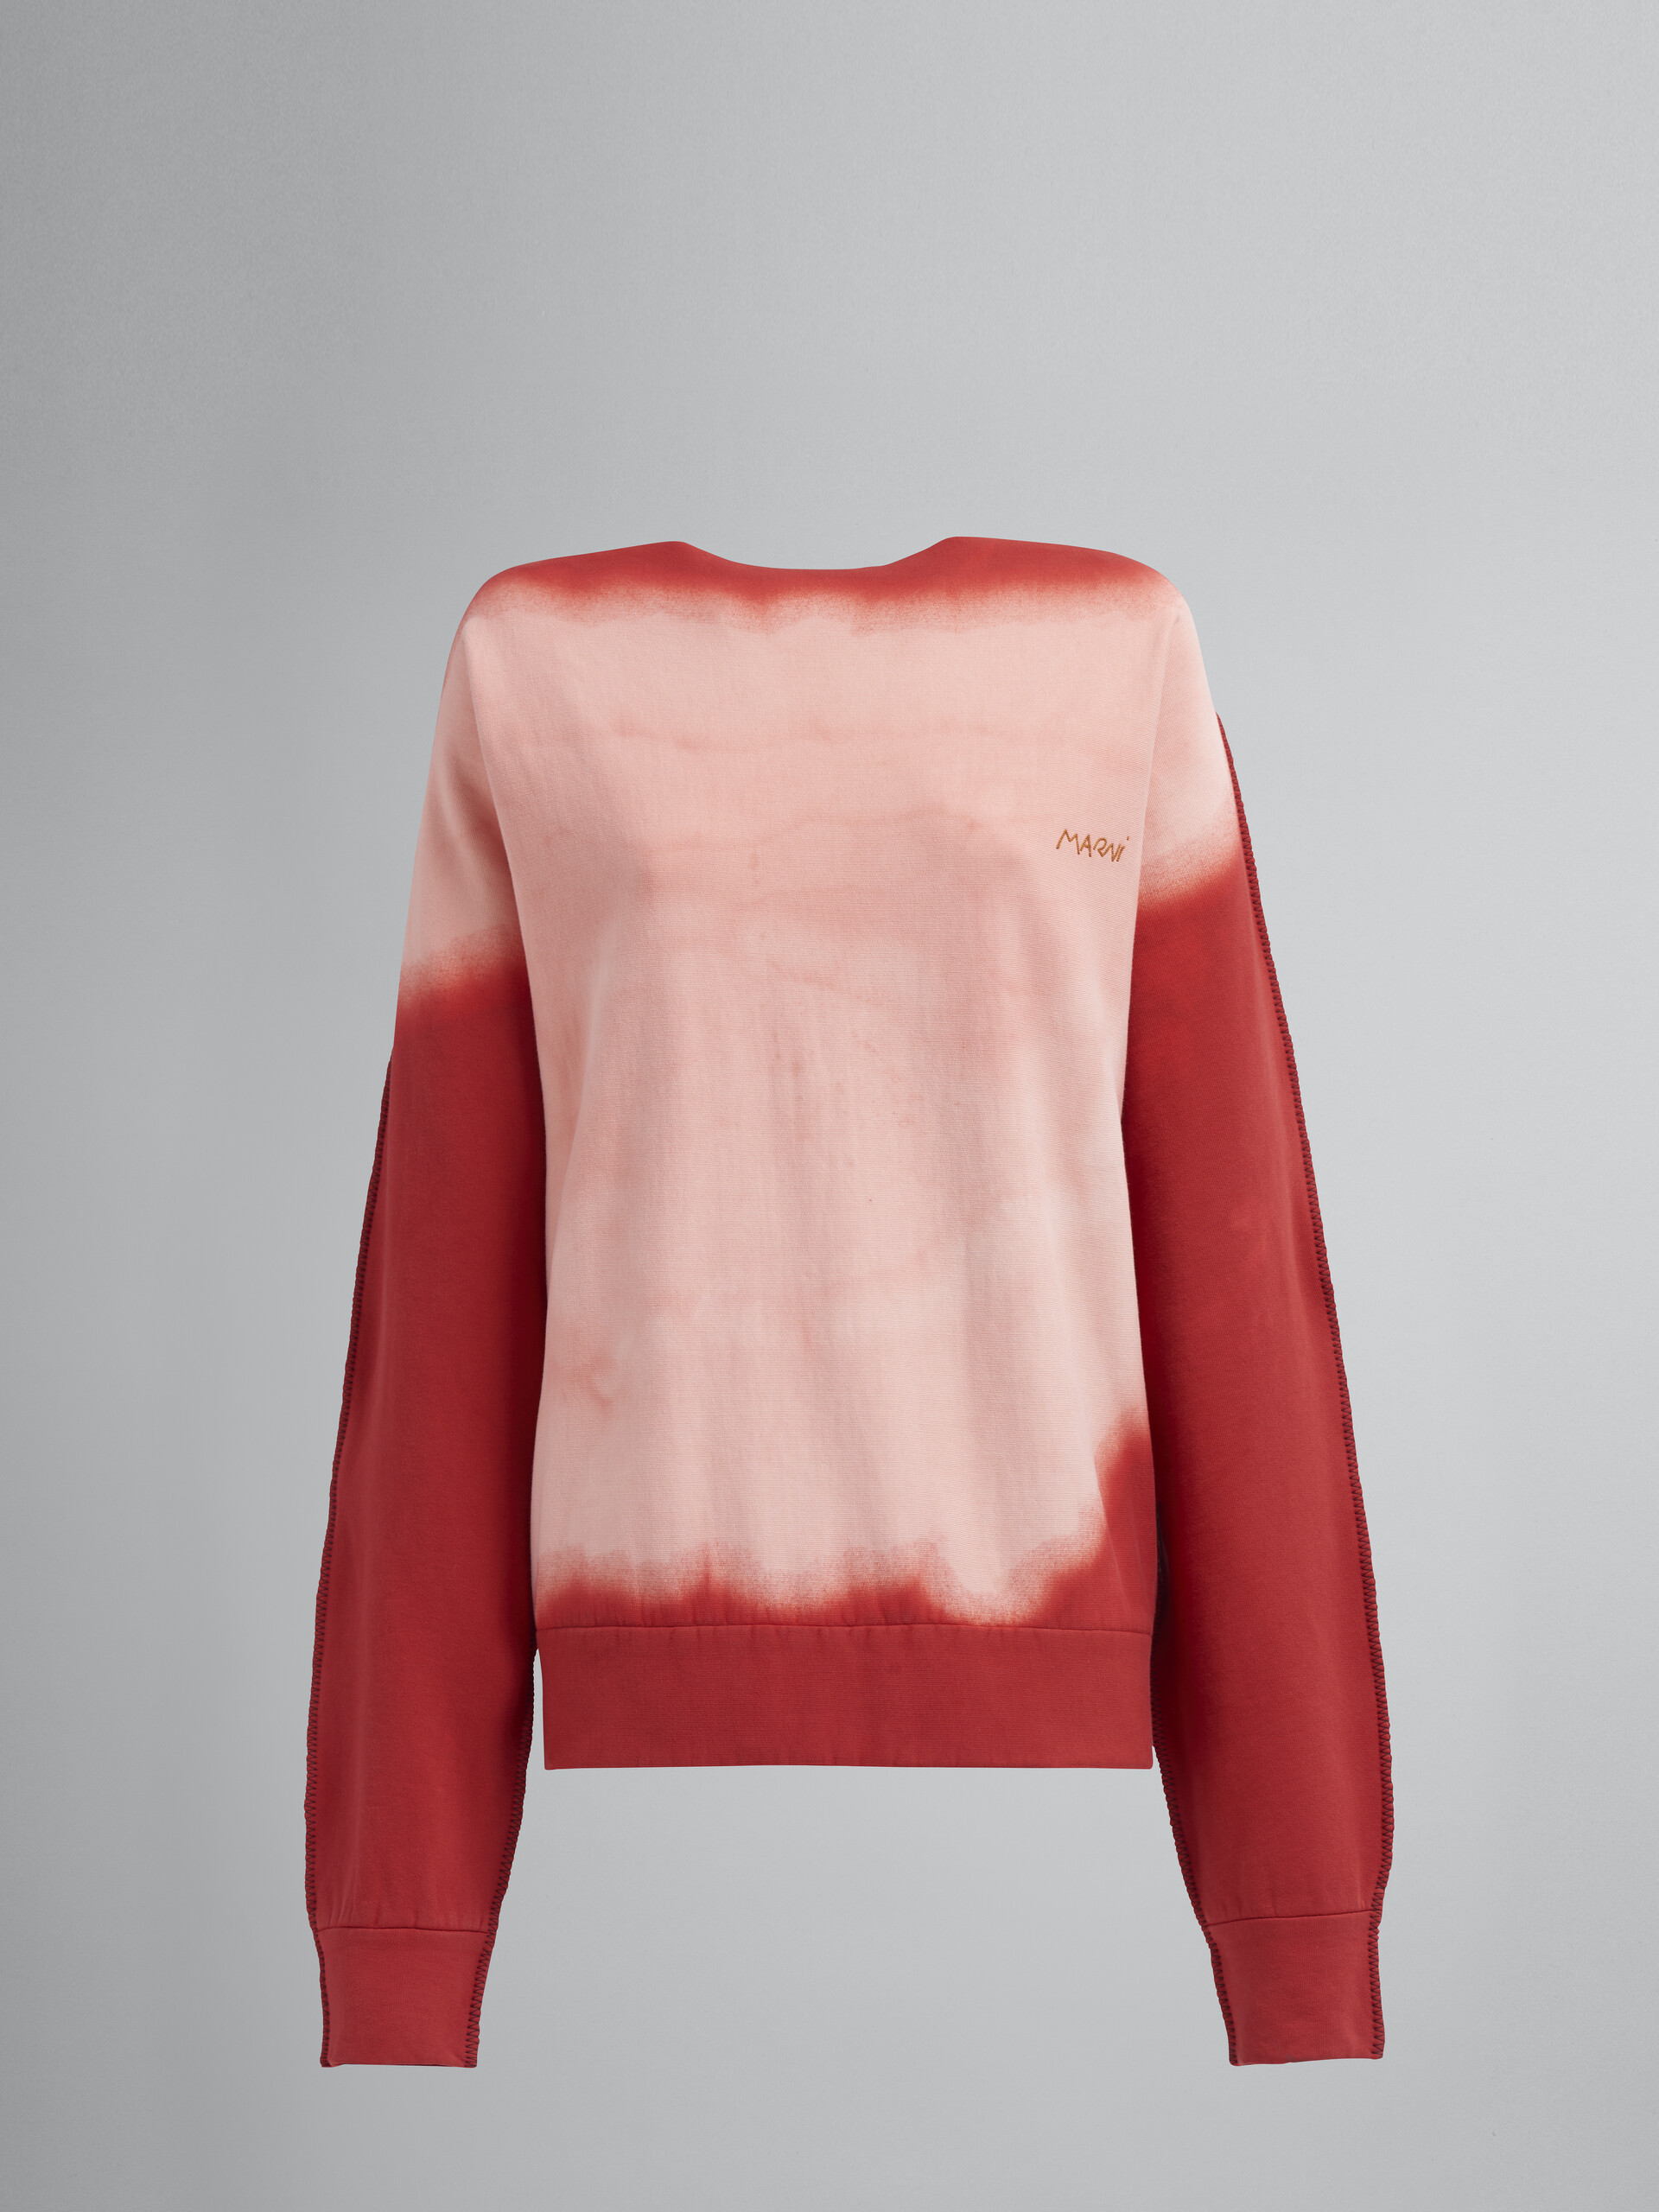 Double-dyed corrosion print cotton sweatshirt - Pullovers - Image 1